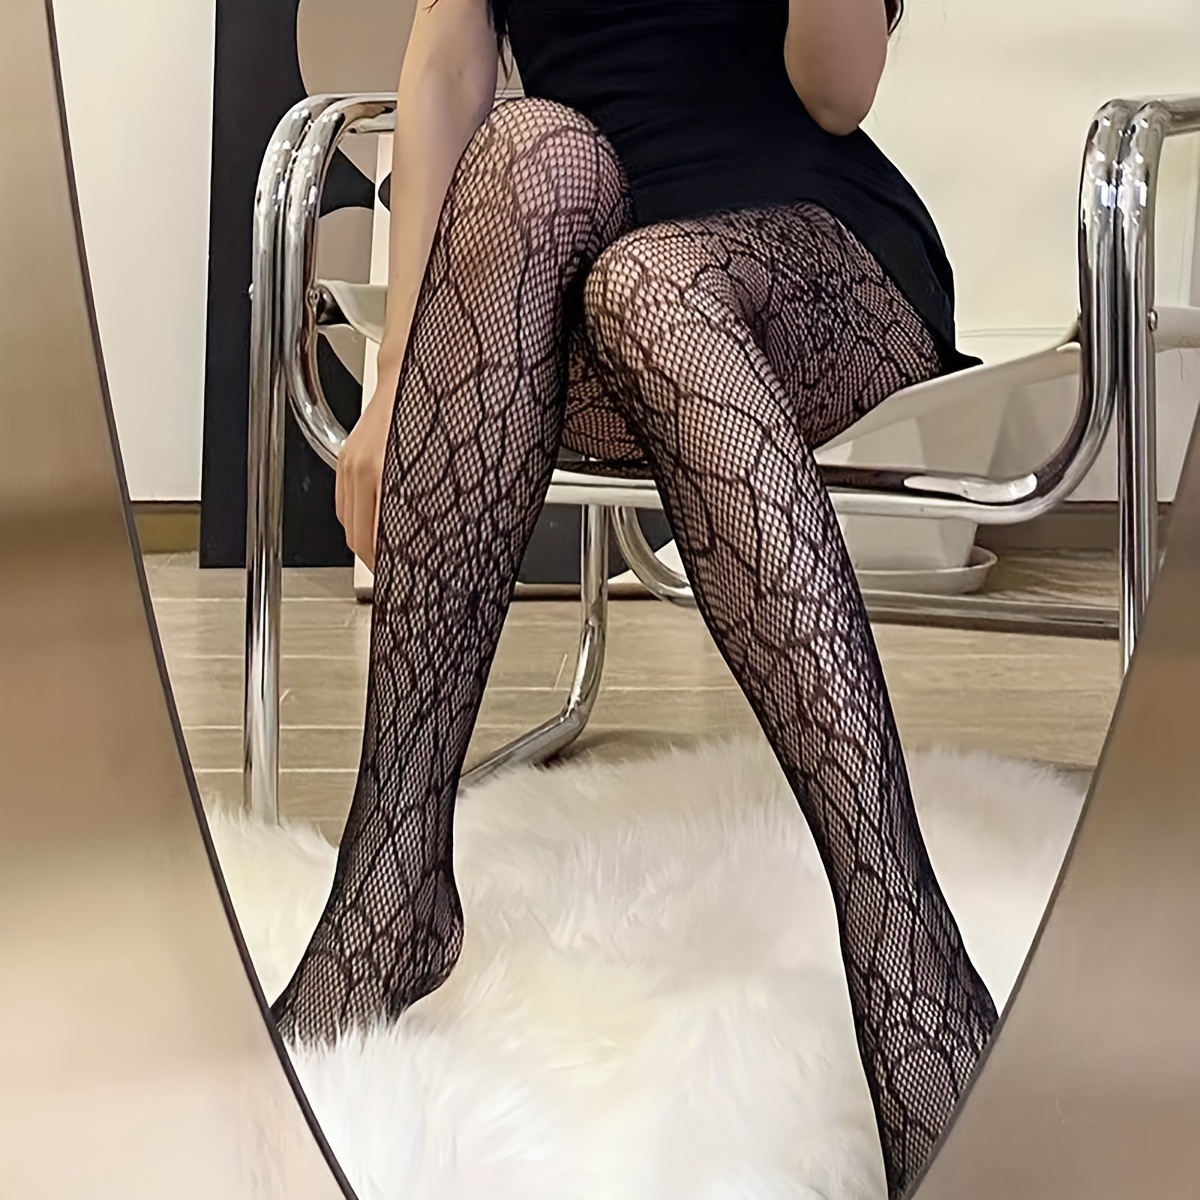 Spiderweb Tights - Adult One Size